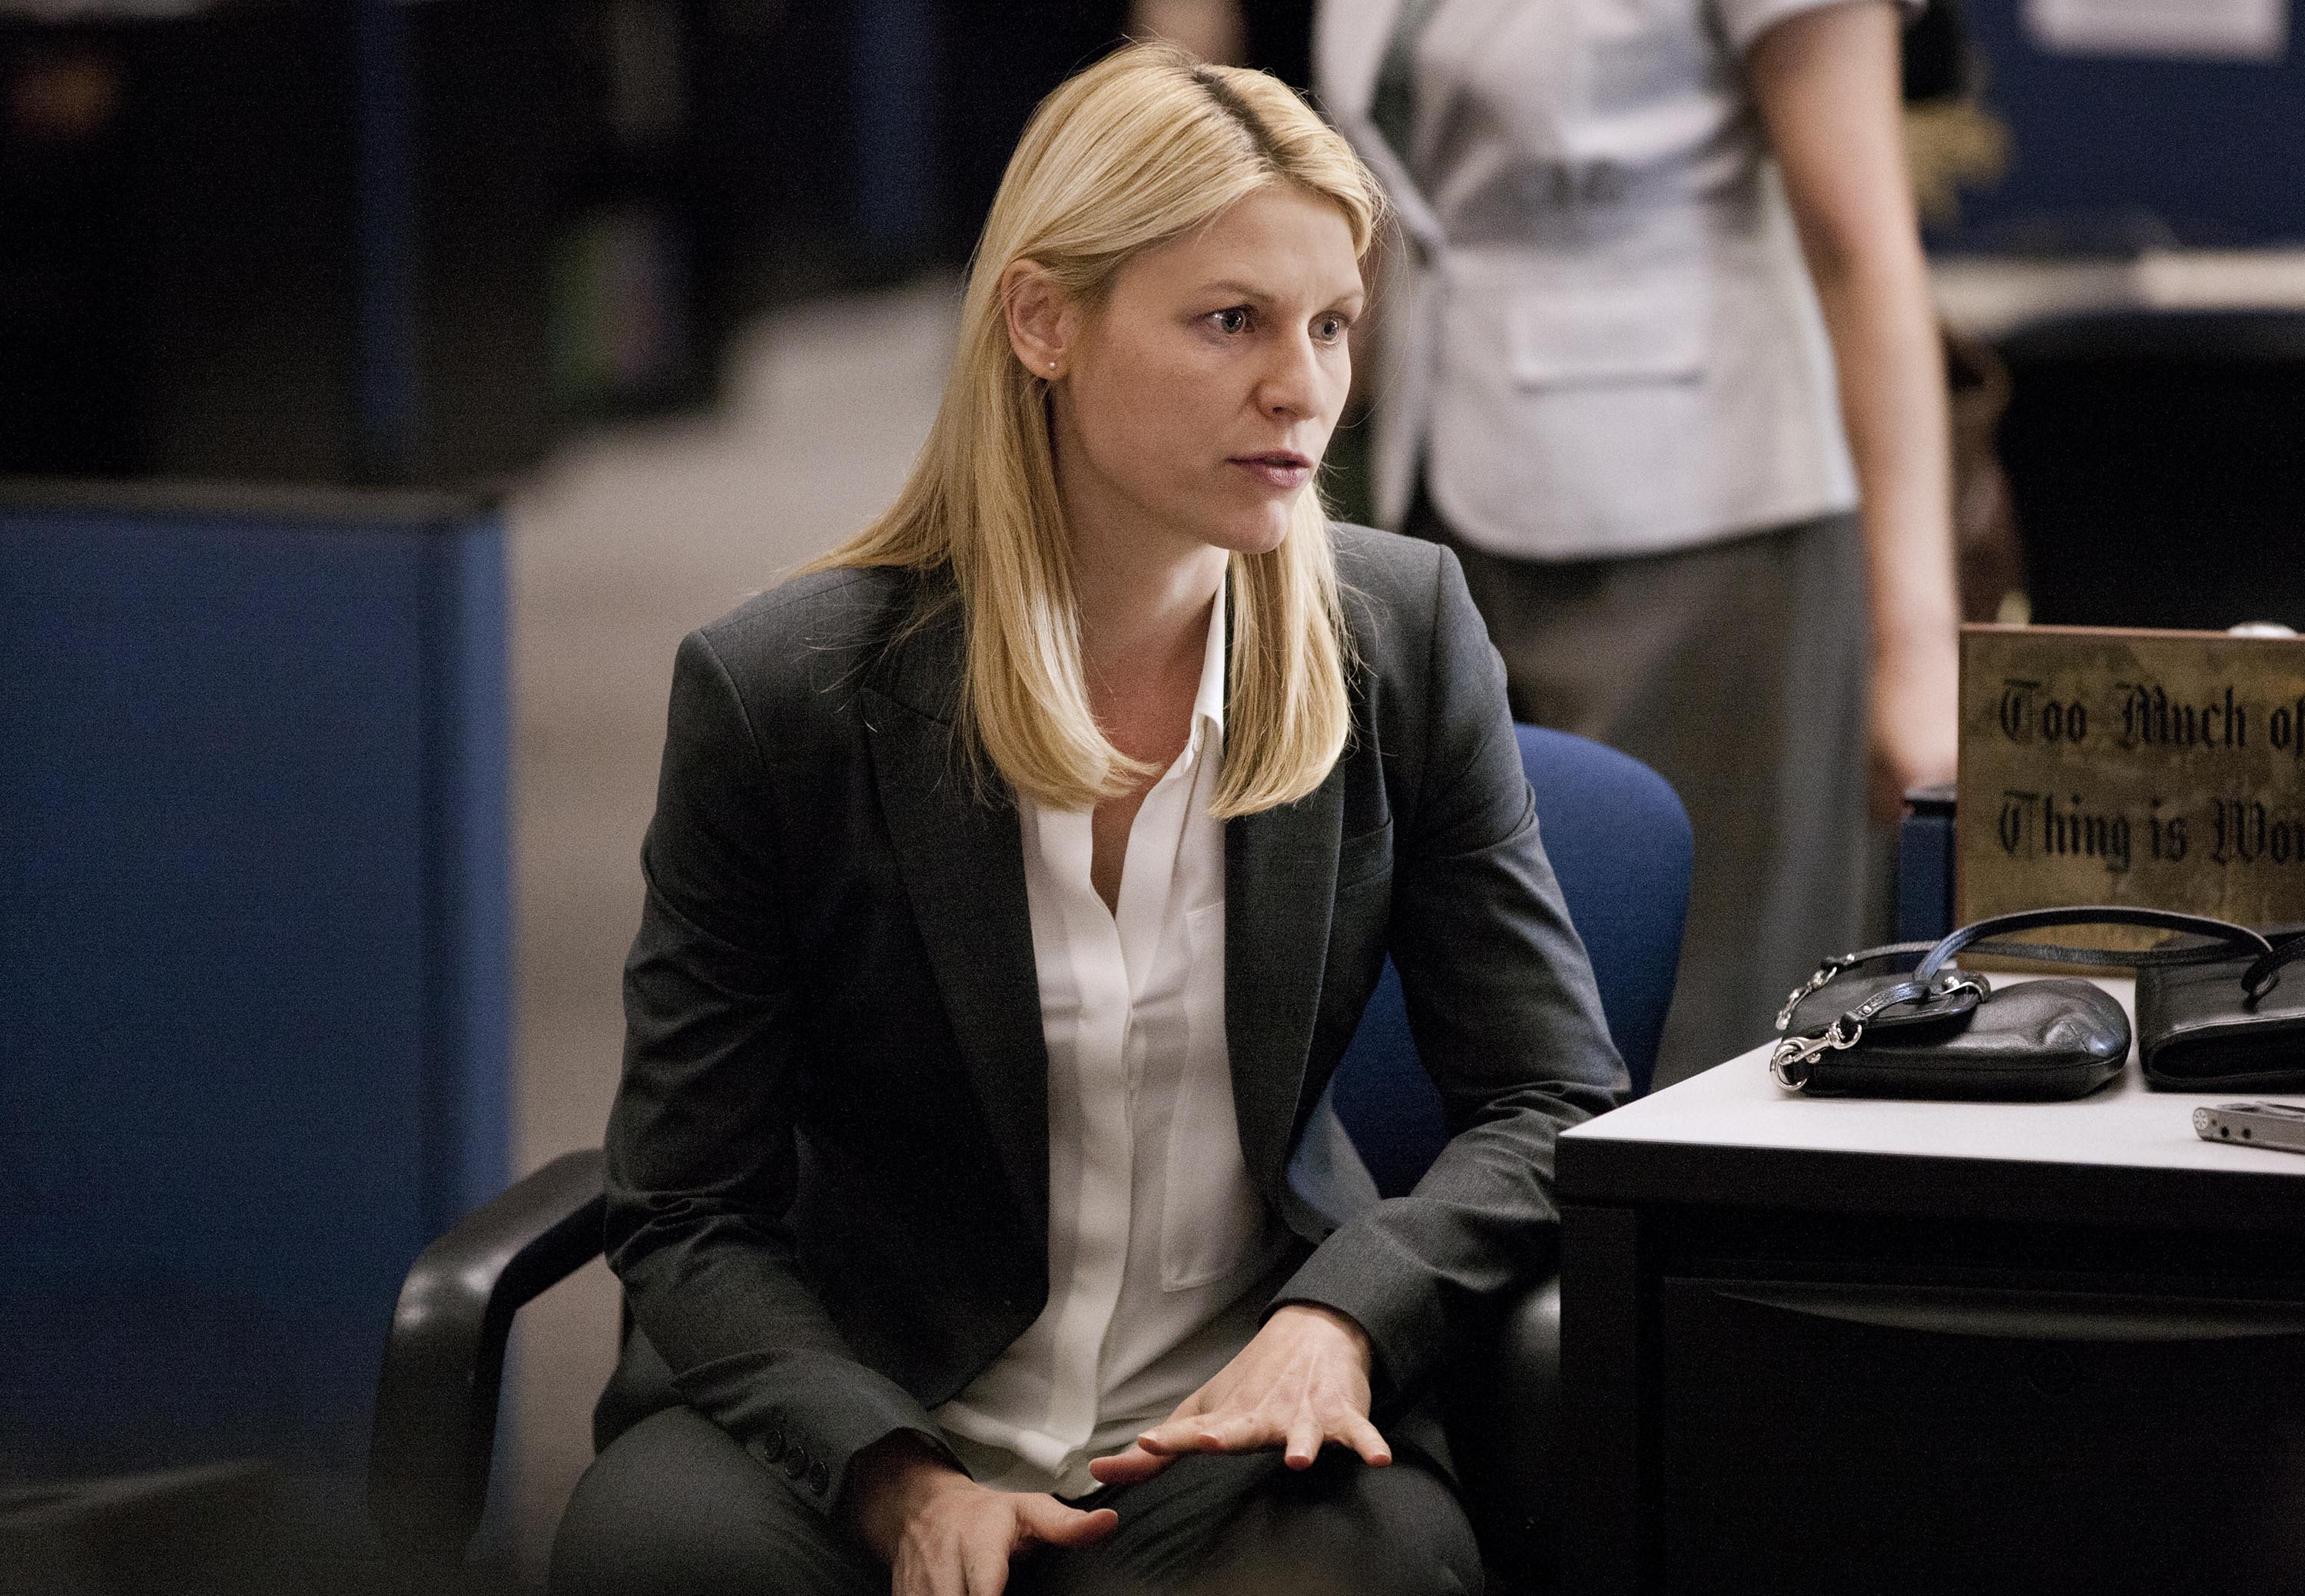 Claire Danes profile: 'She has intensity and immersion in the character', Homeland